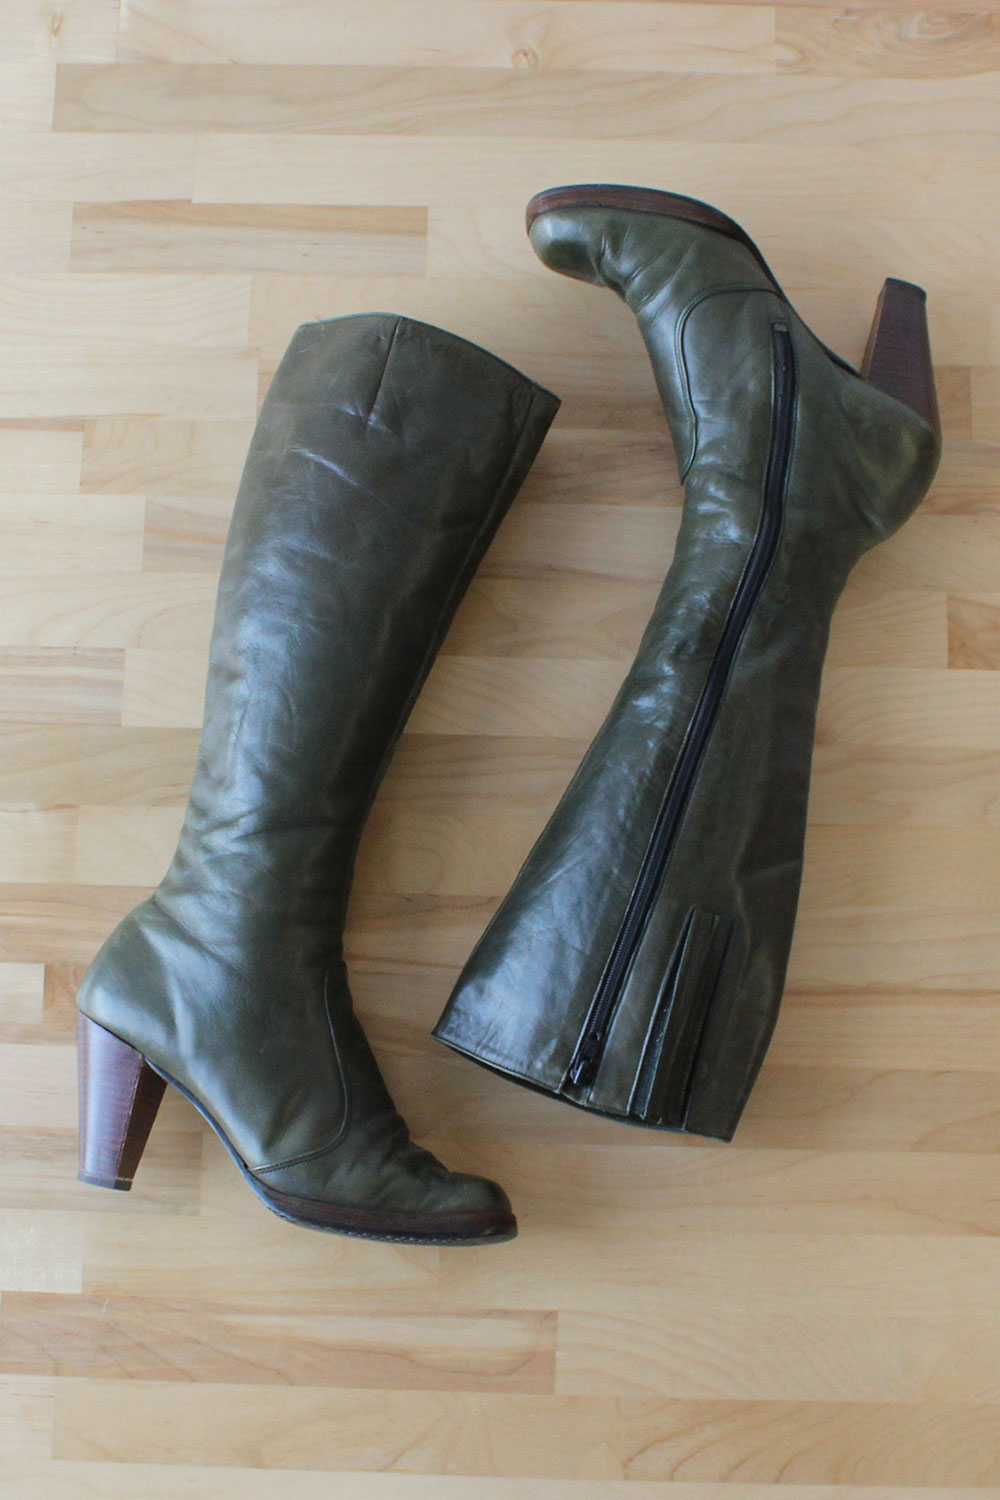 green leather knee high boots